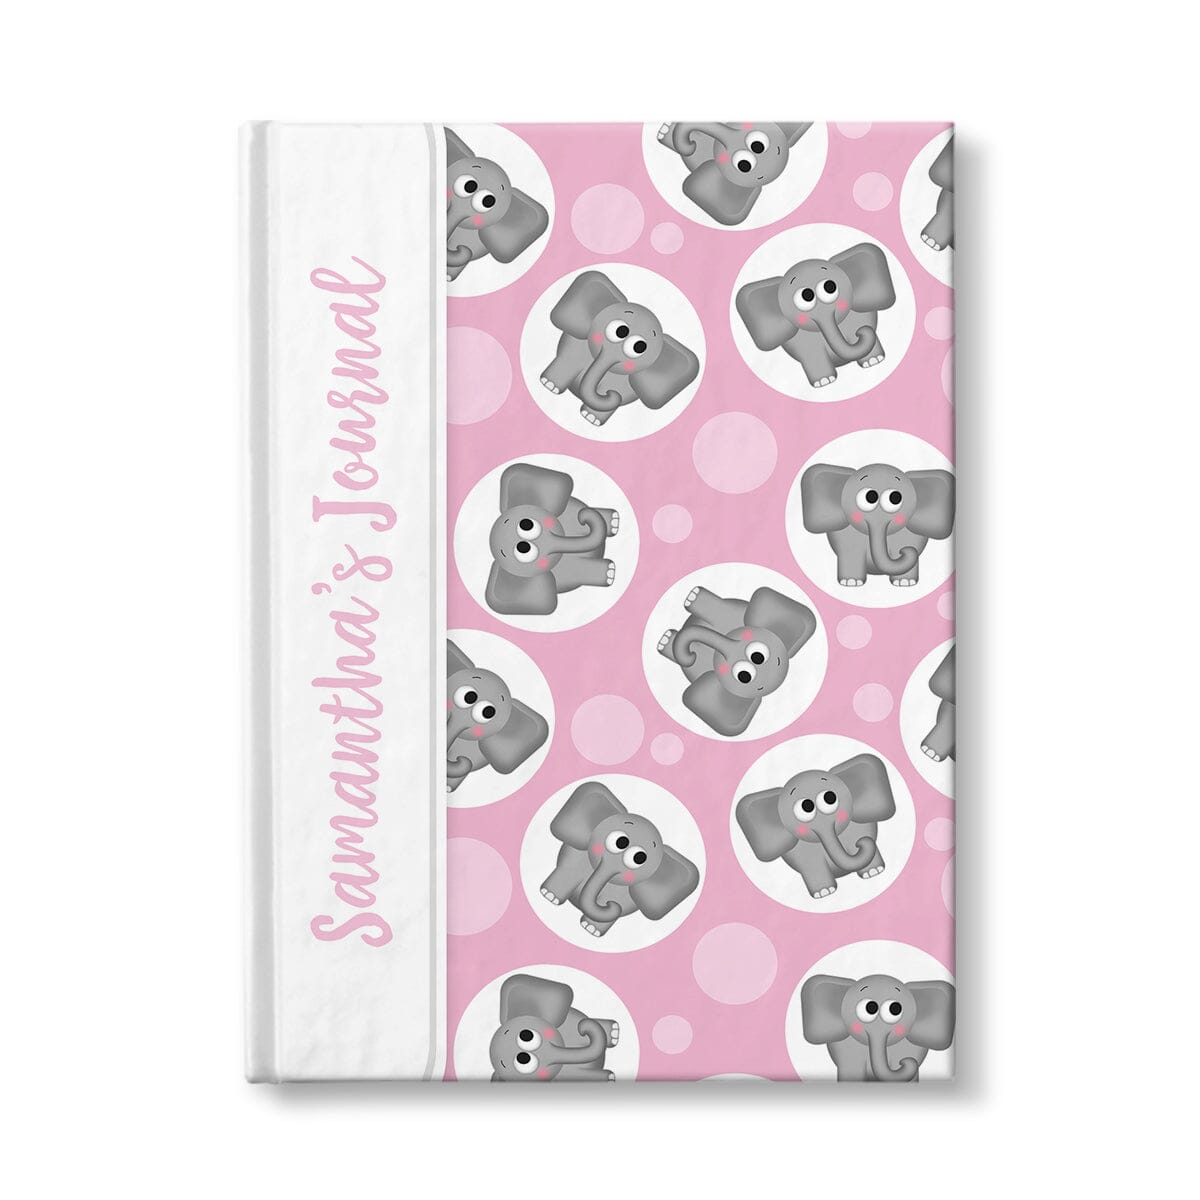 Personalized Cute Pink Elephant Journal at Artistically Invited.